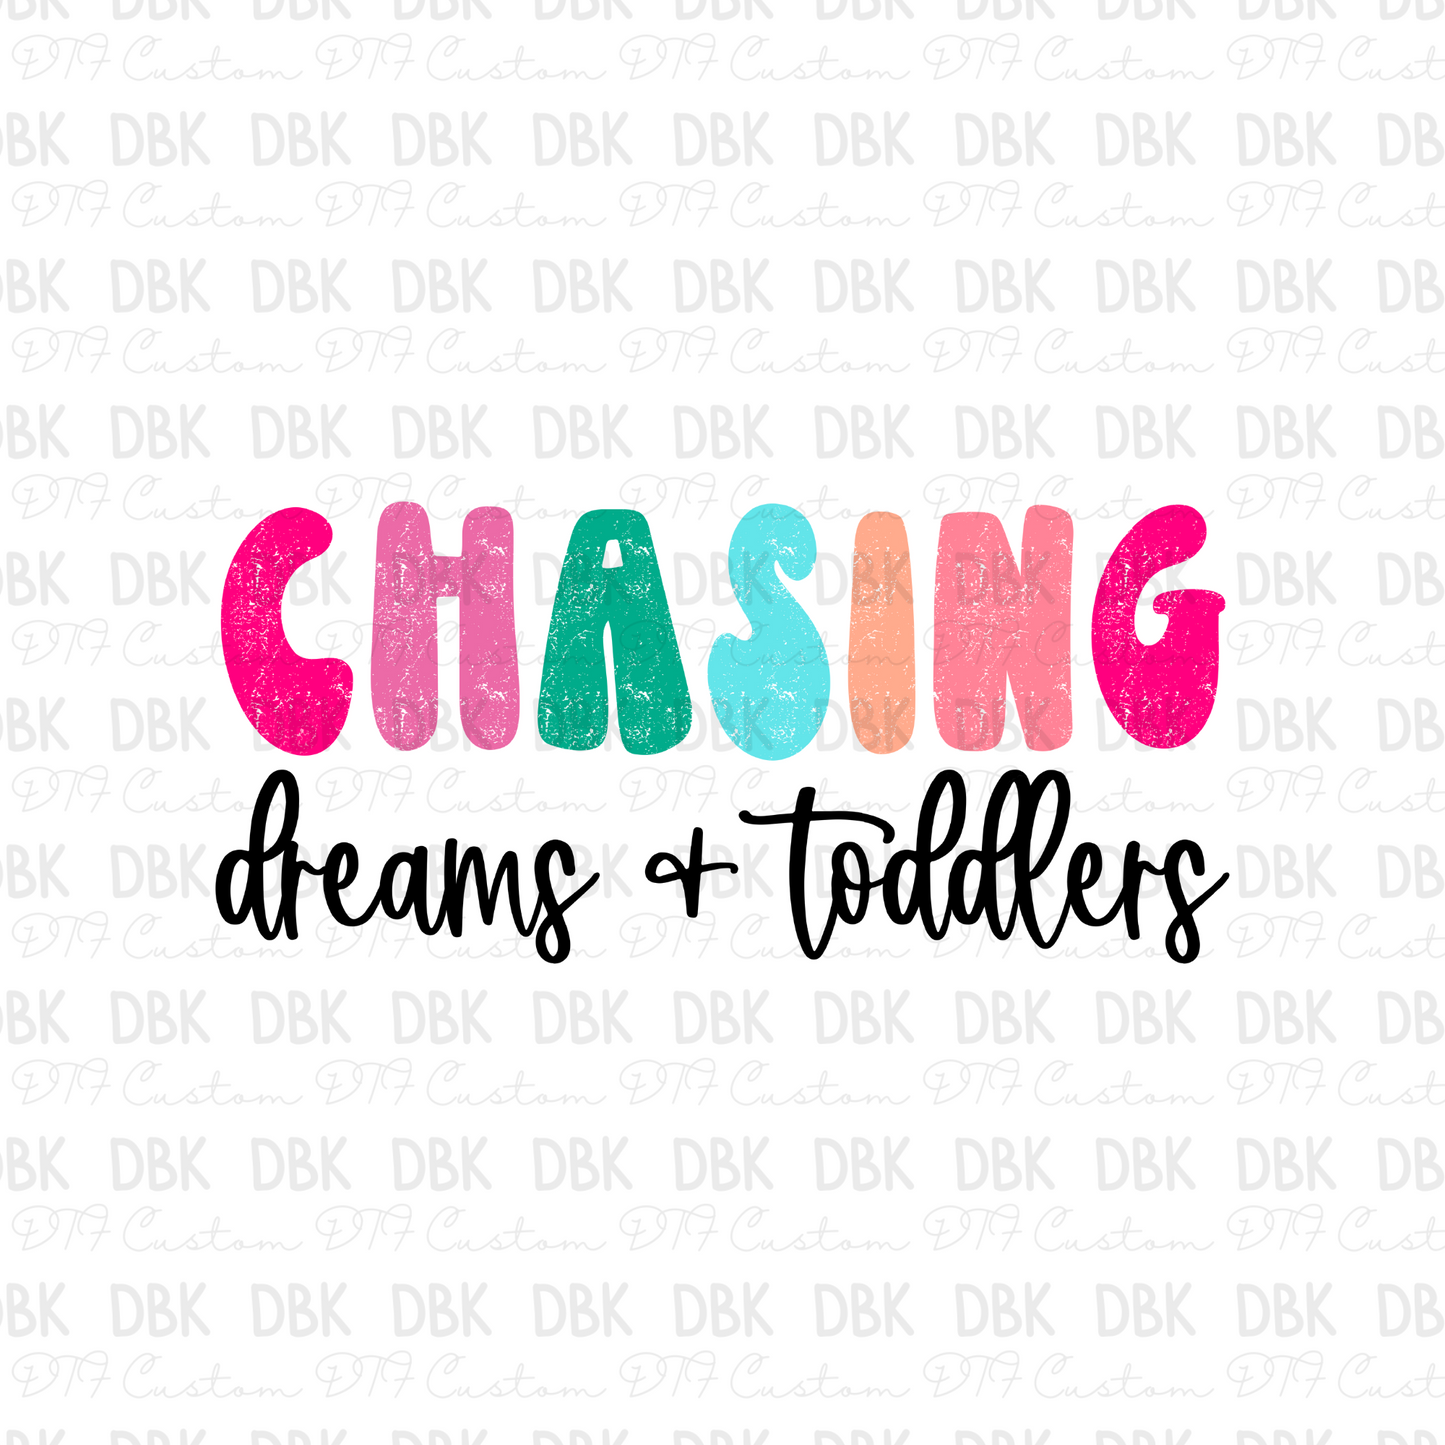 Chasing dreams & toddlers DTF transfer